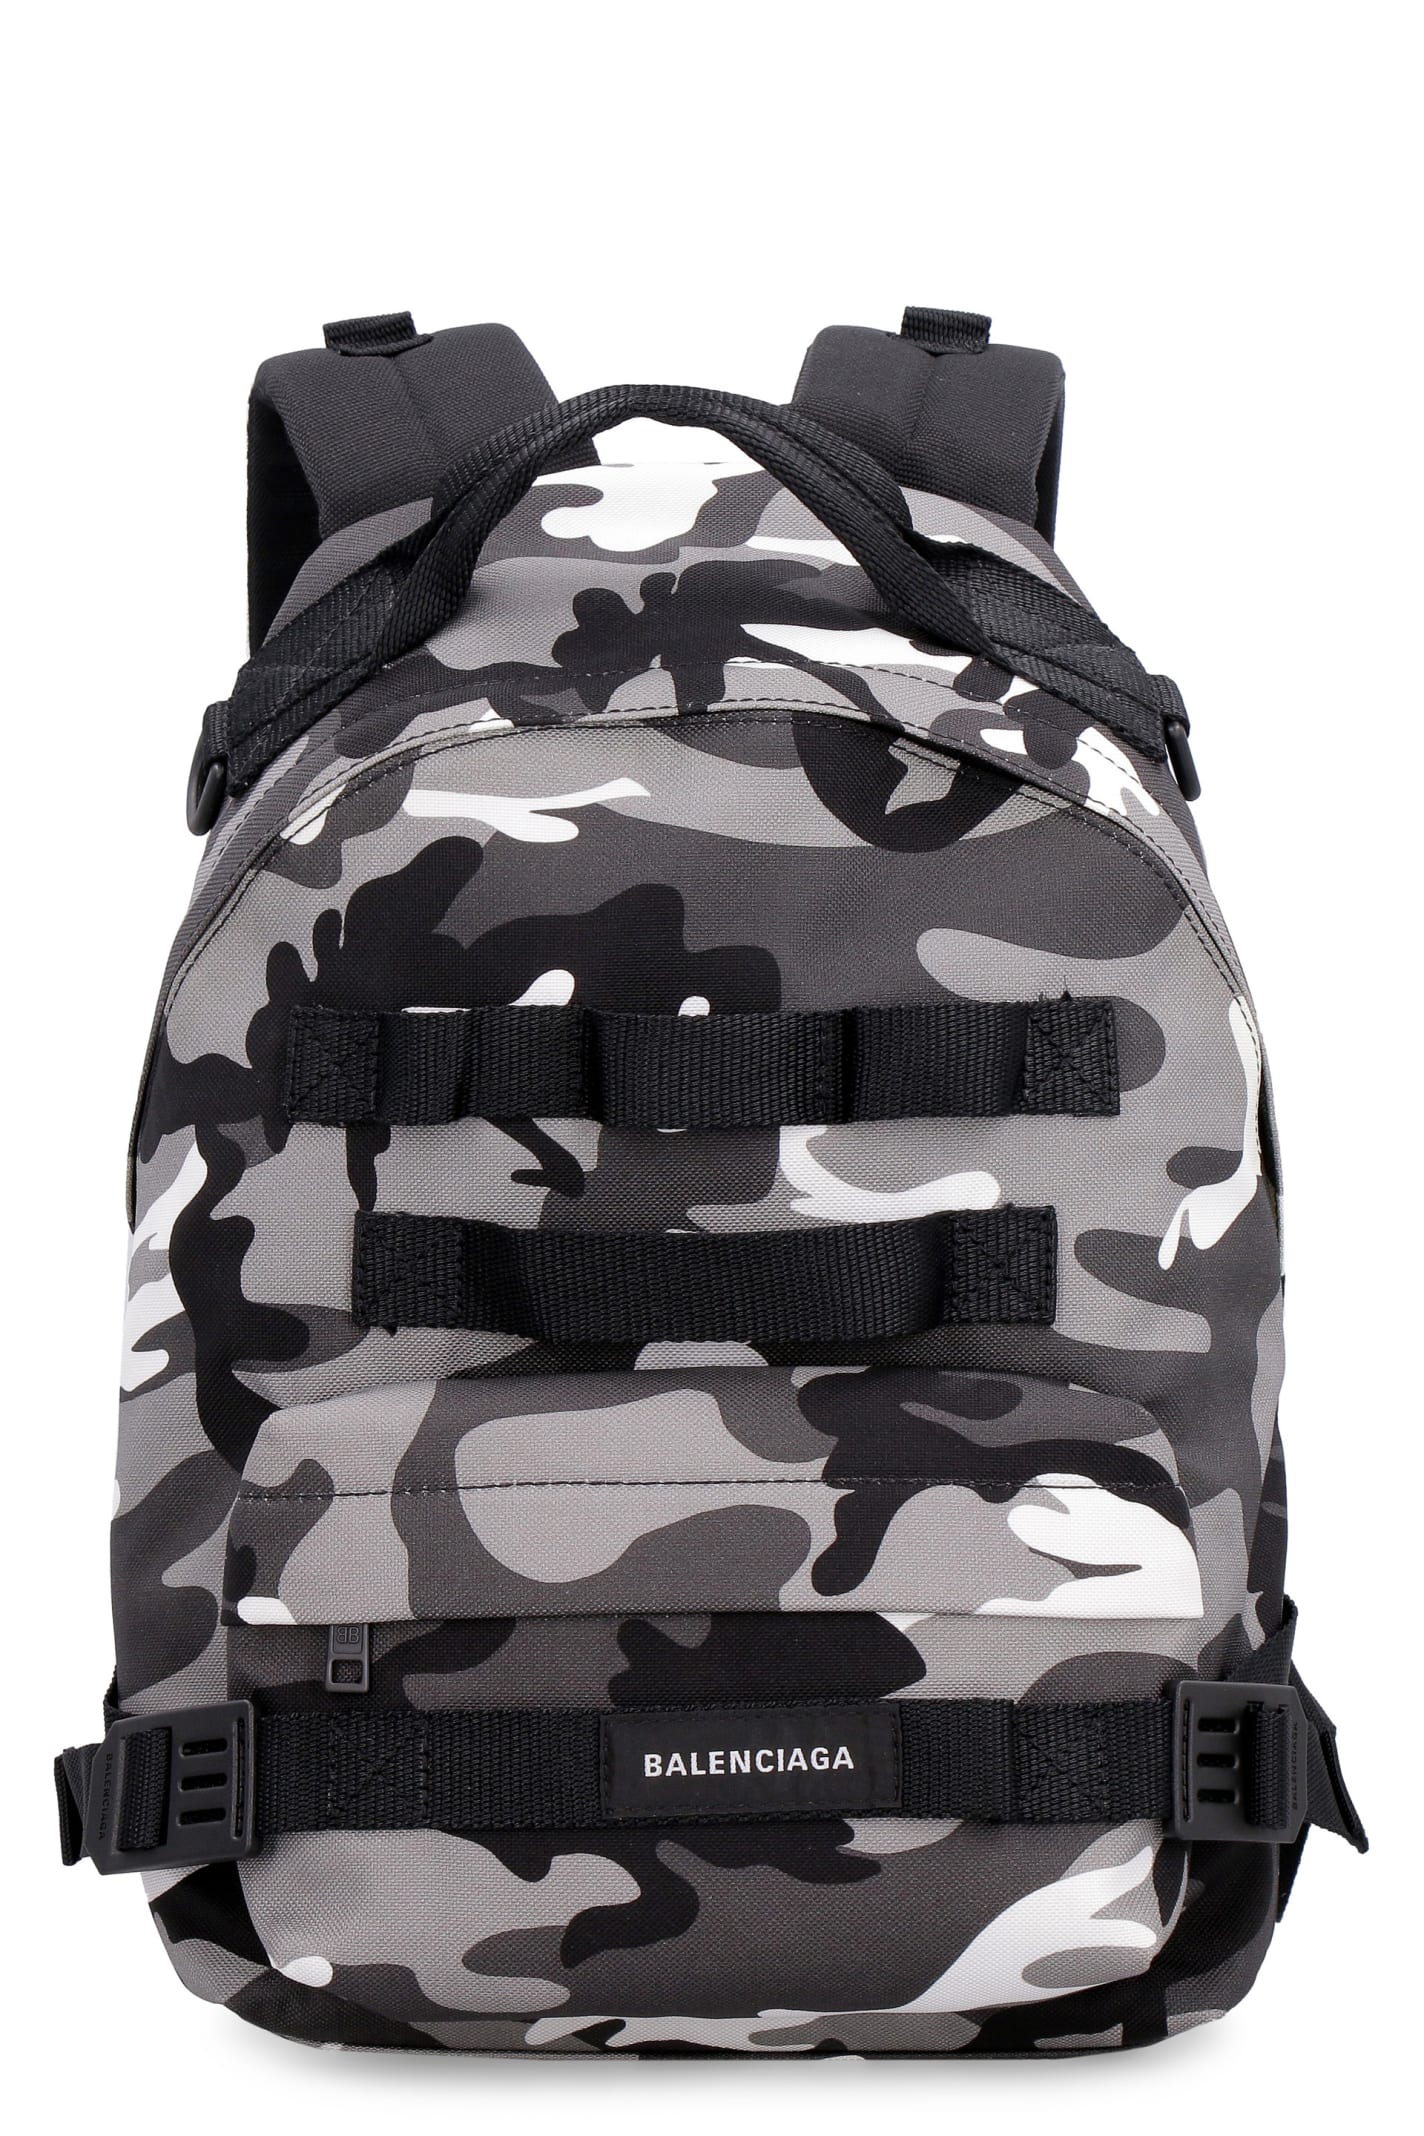 BALENCIAGA ARMY MULTICARRY NYLON BACKPACK WITH PATCH